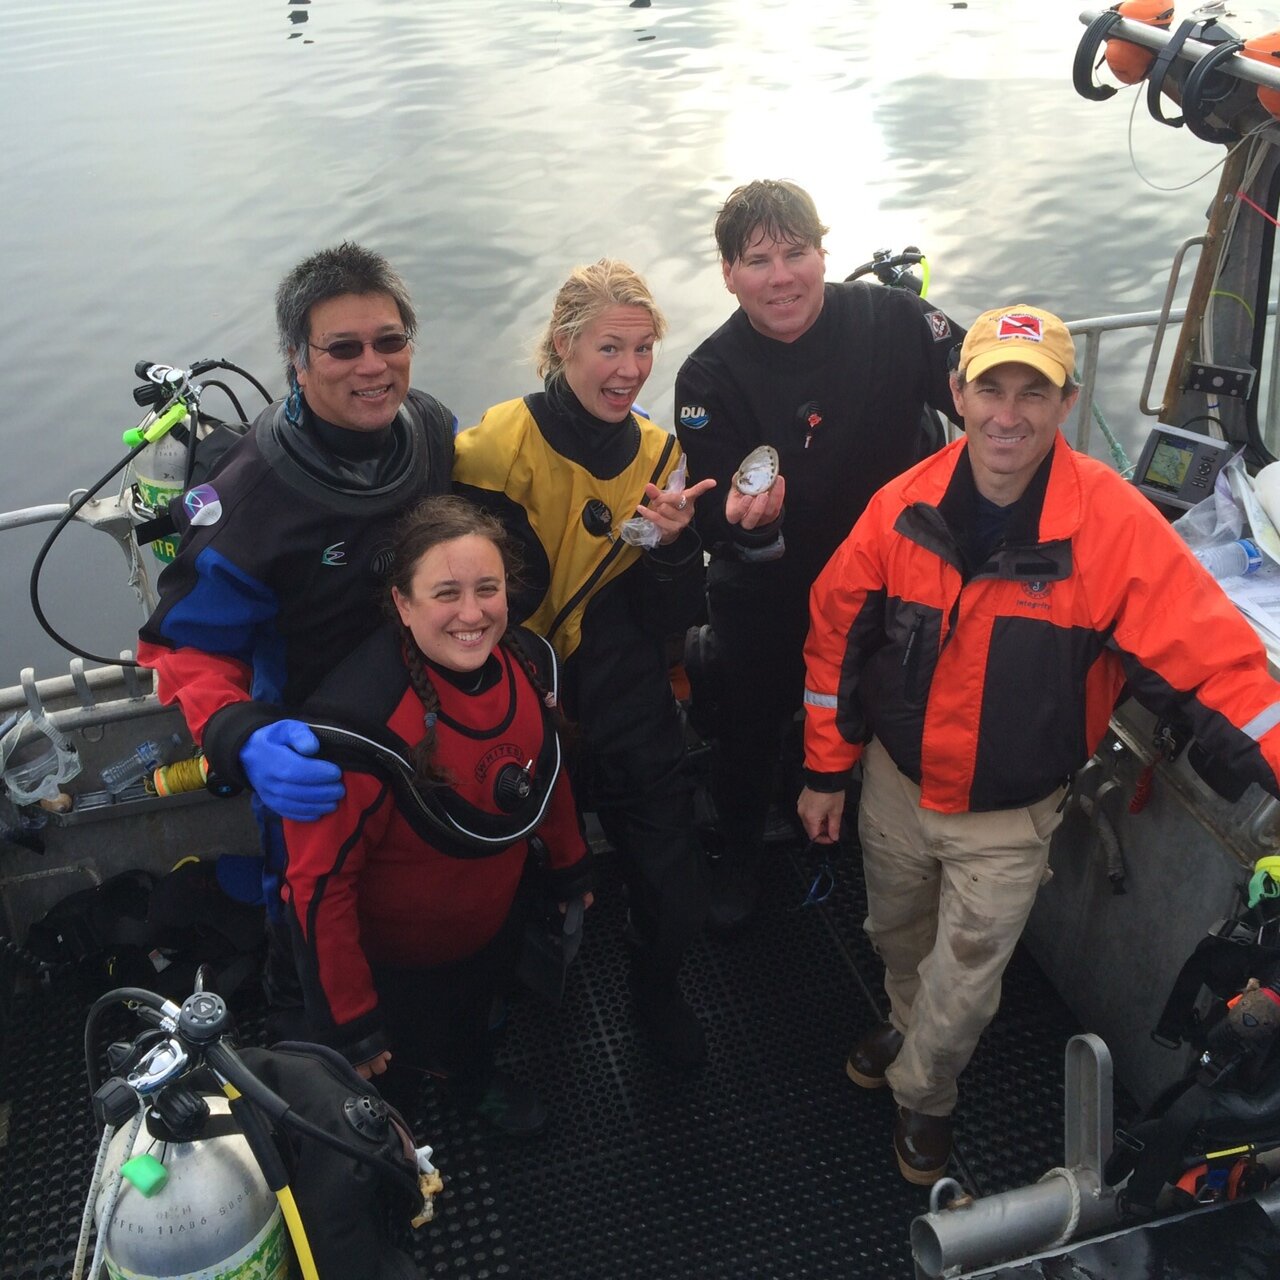  The A(balone) Team (left to right): Alan, Pema, Taylor, Nate, Kyle. Diving for abalone in Sitka, AK, during an American Academy of Underwater Science conference. Photo by Dr. Jim Nestler. 